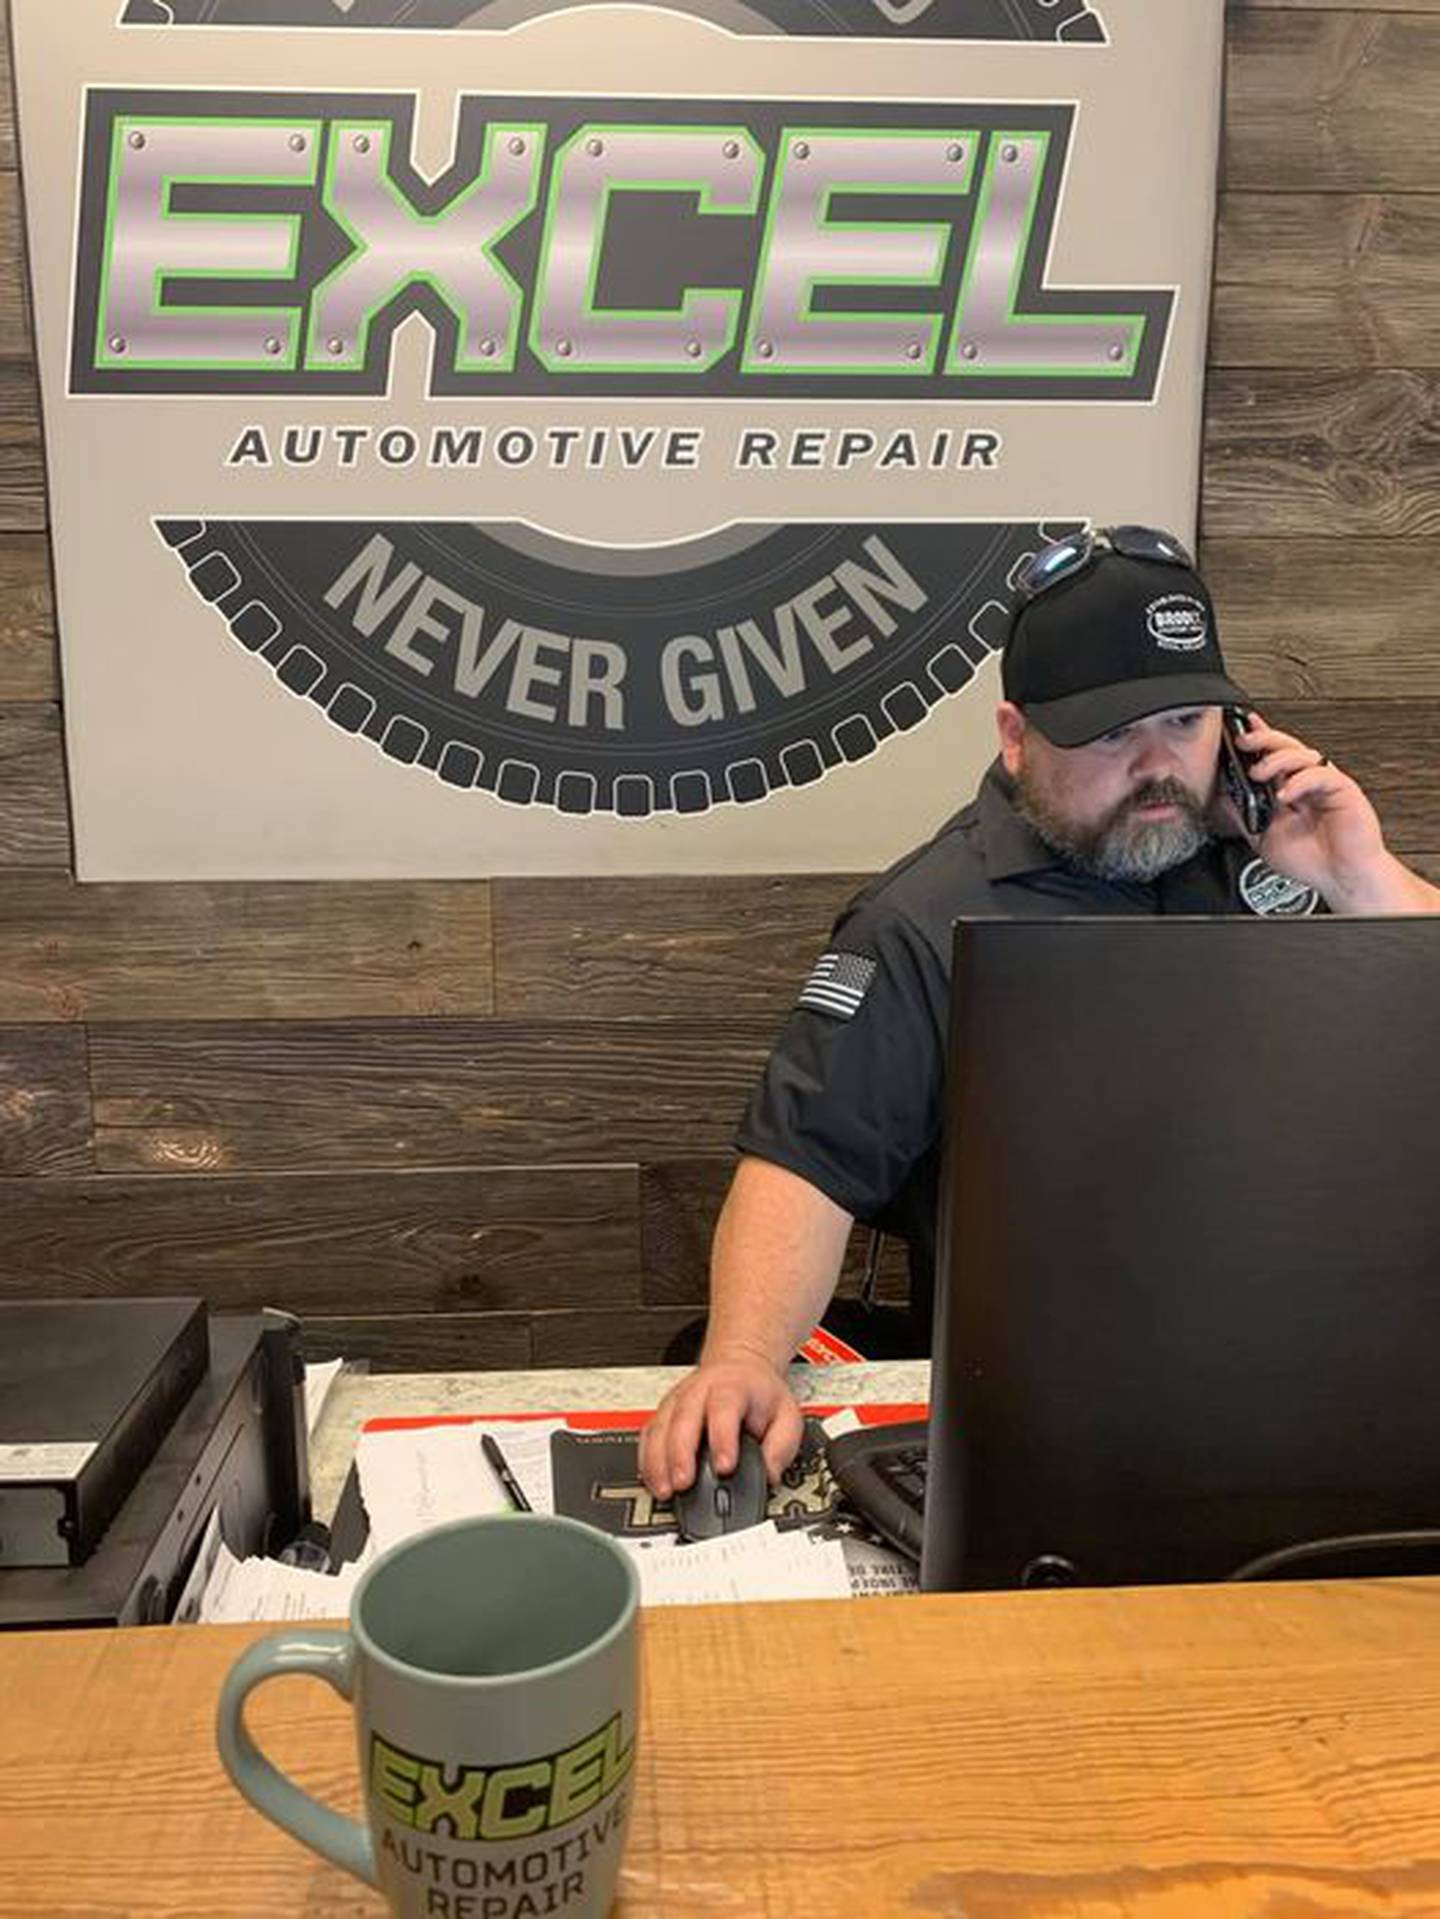 Excel Automotive Repair offers one of the best oil changes in Kane County. (Excel Automotive Repair via Facebook)